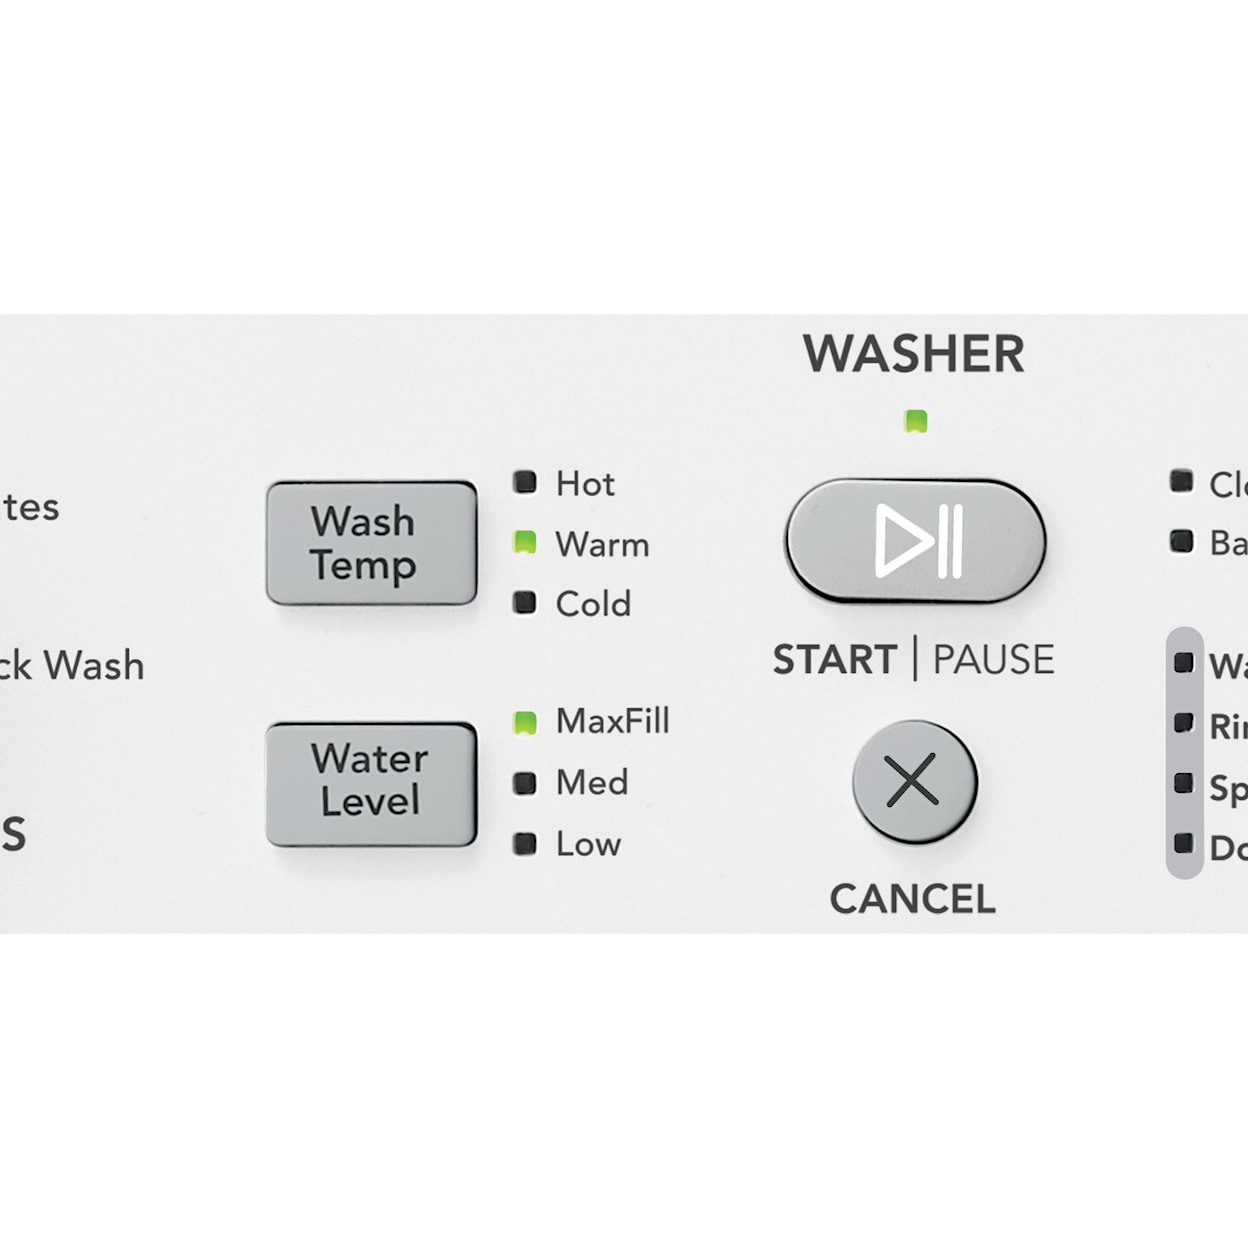 Frigidaire Washer and Dryer Combo Laundry Center